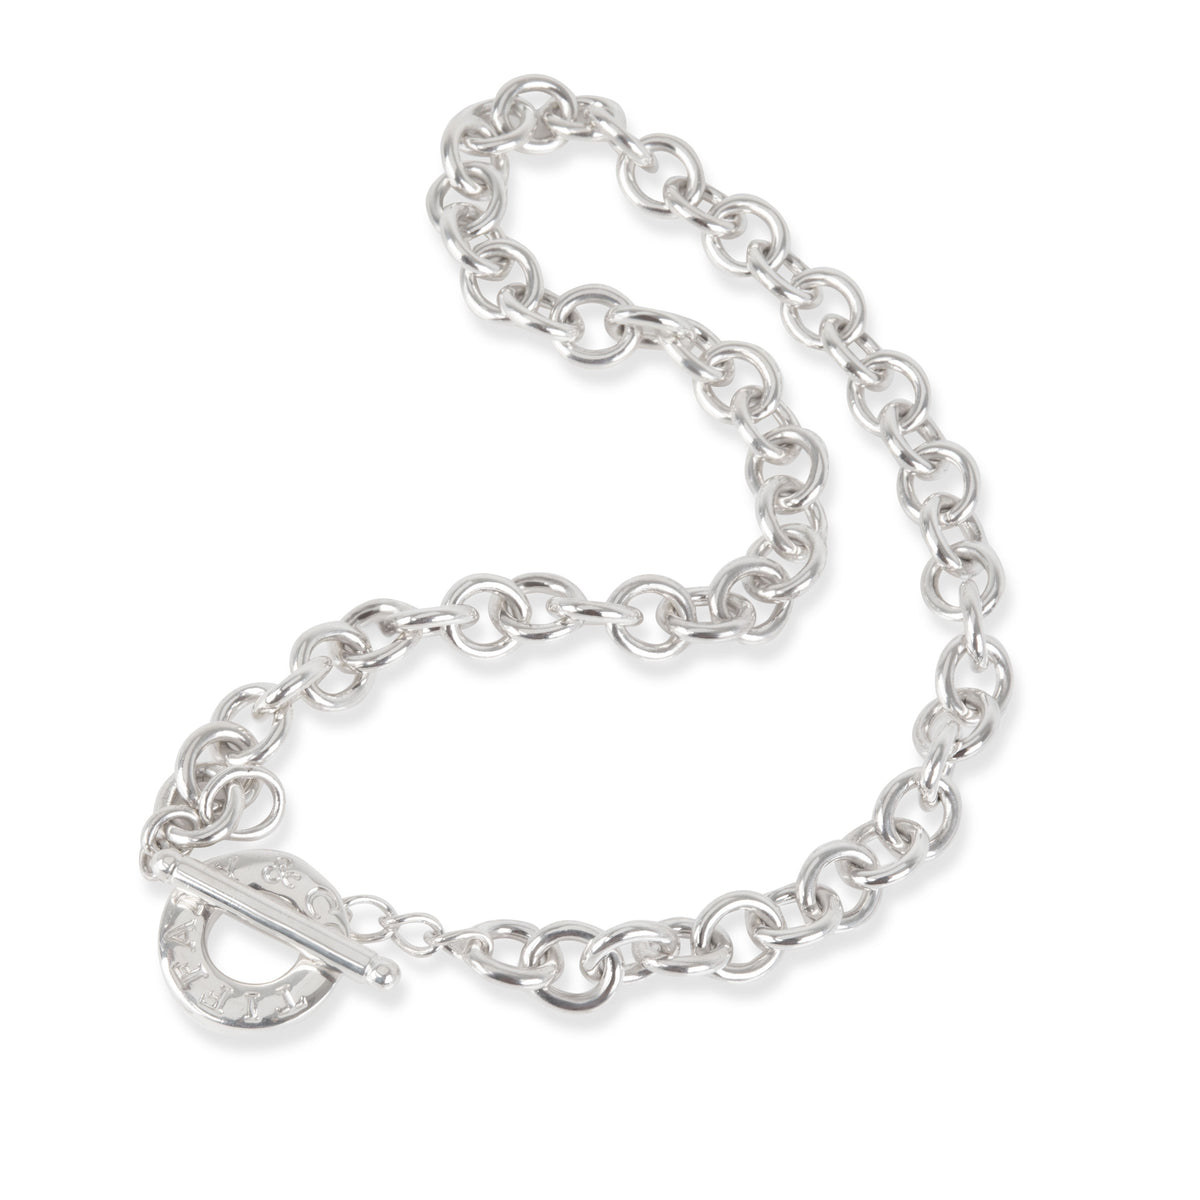 Tiffany & Co. Toggle Necklace in  Sterling Silver